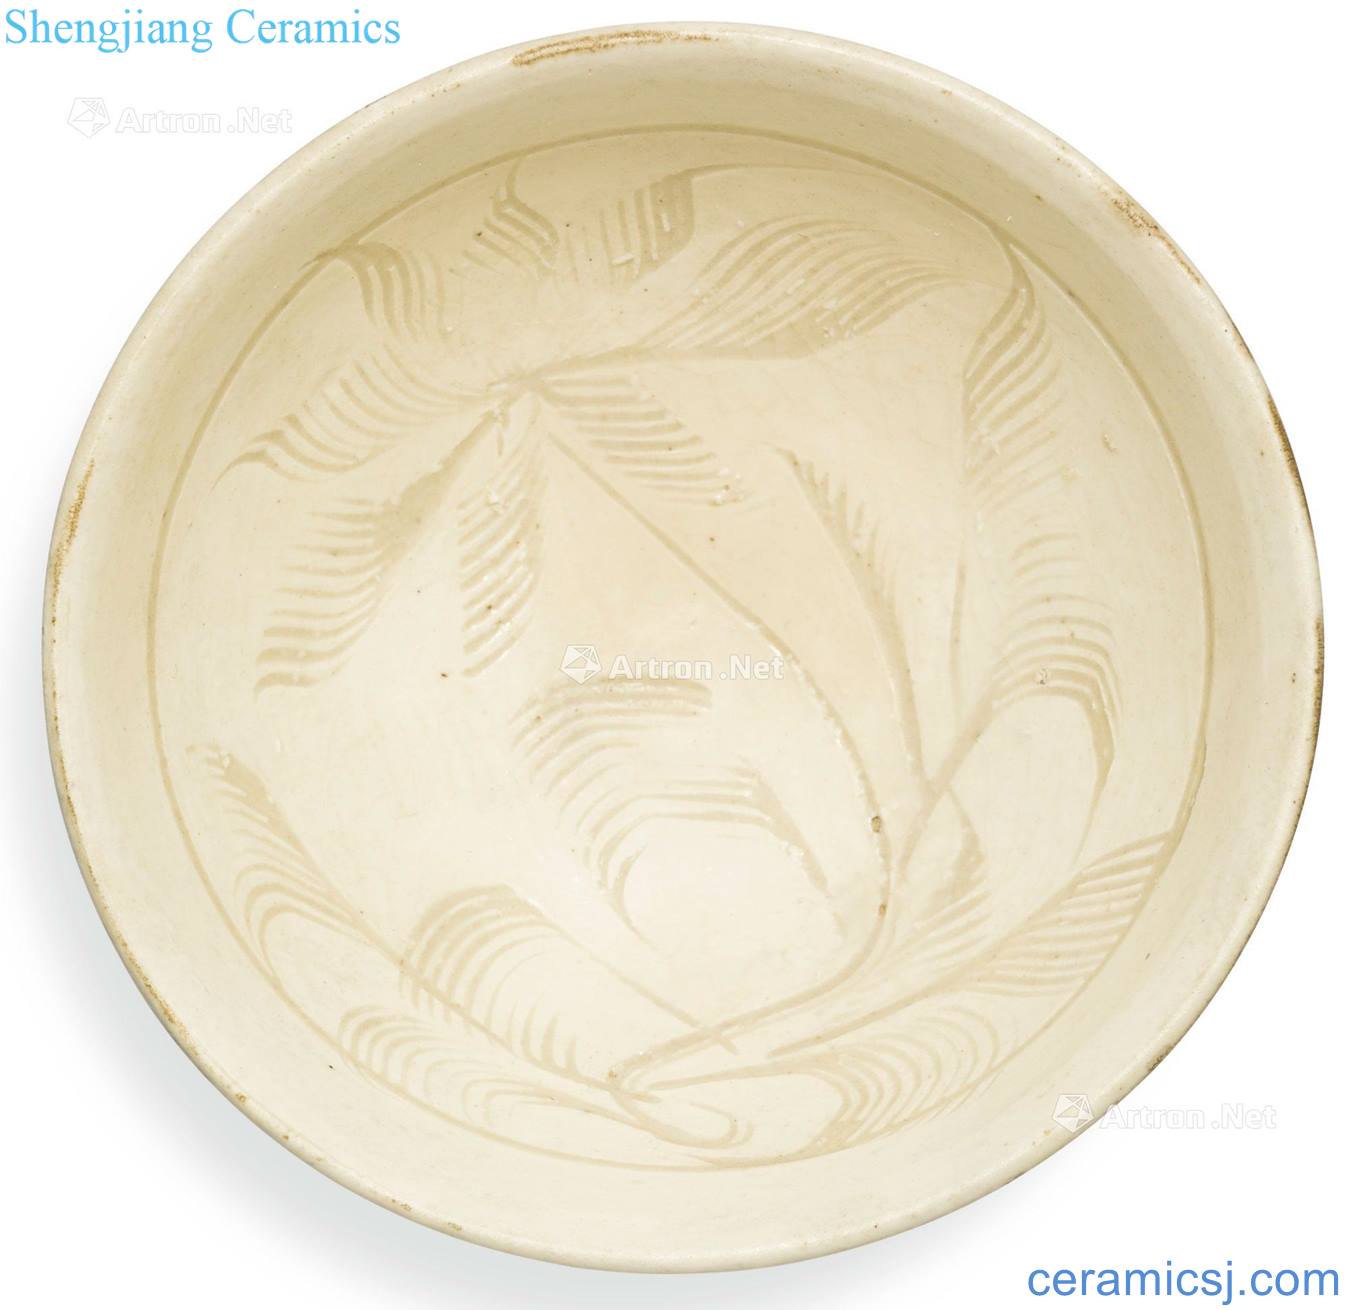 Song magnetic state kiln white glazed carved small 盌